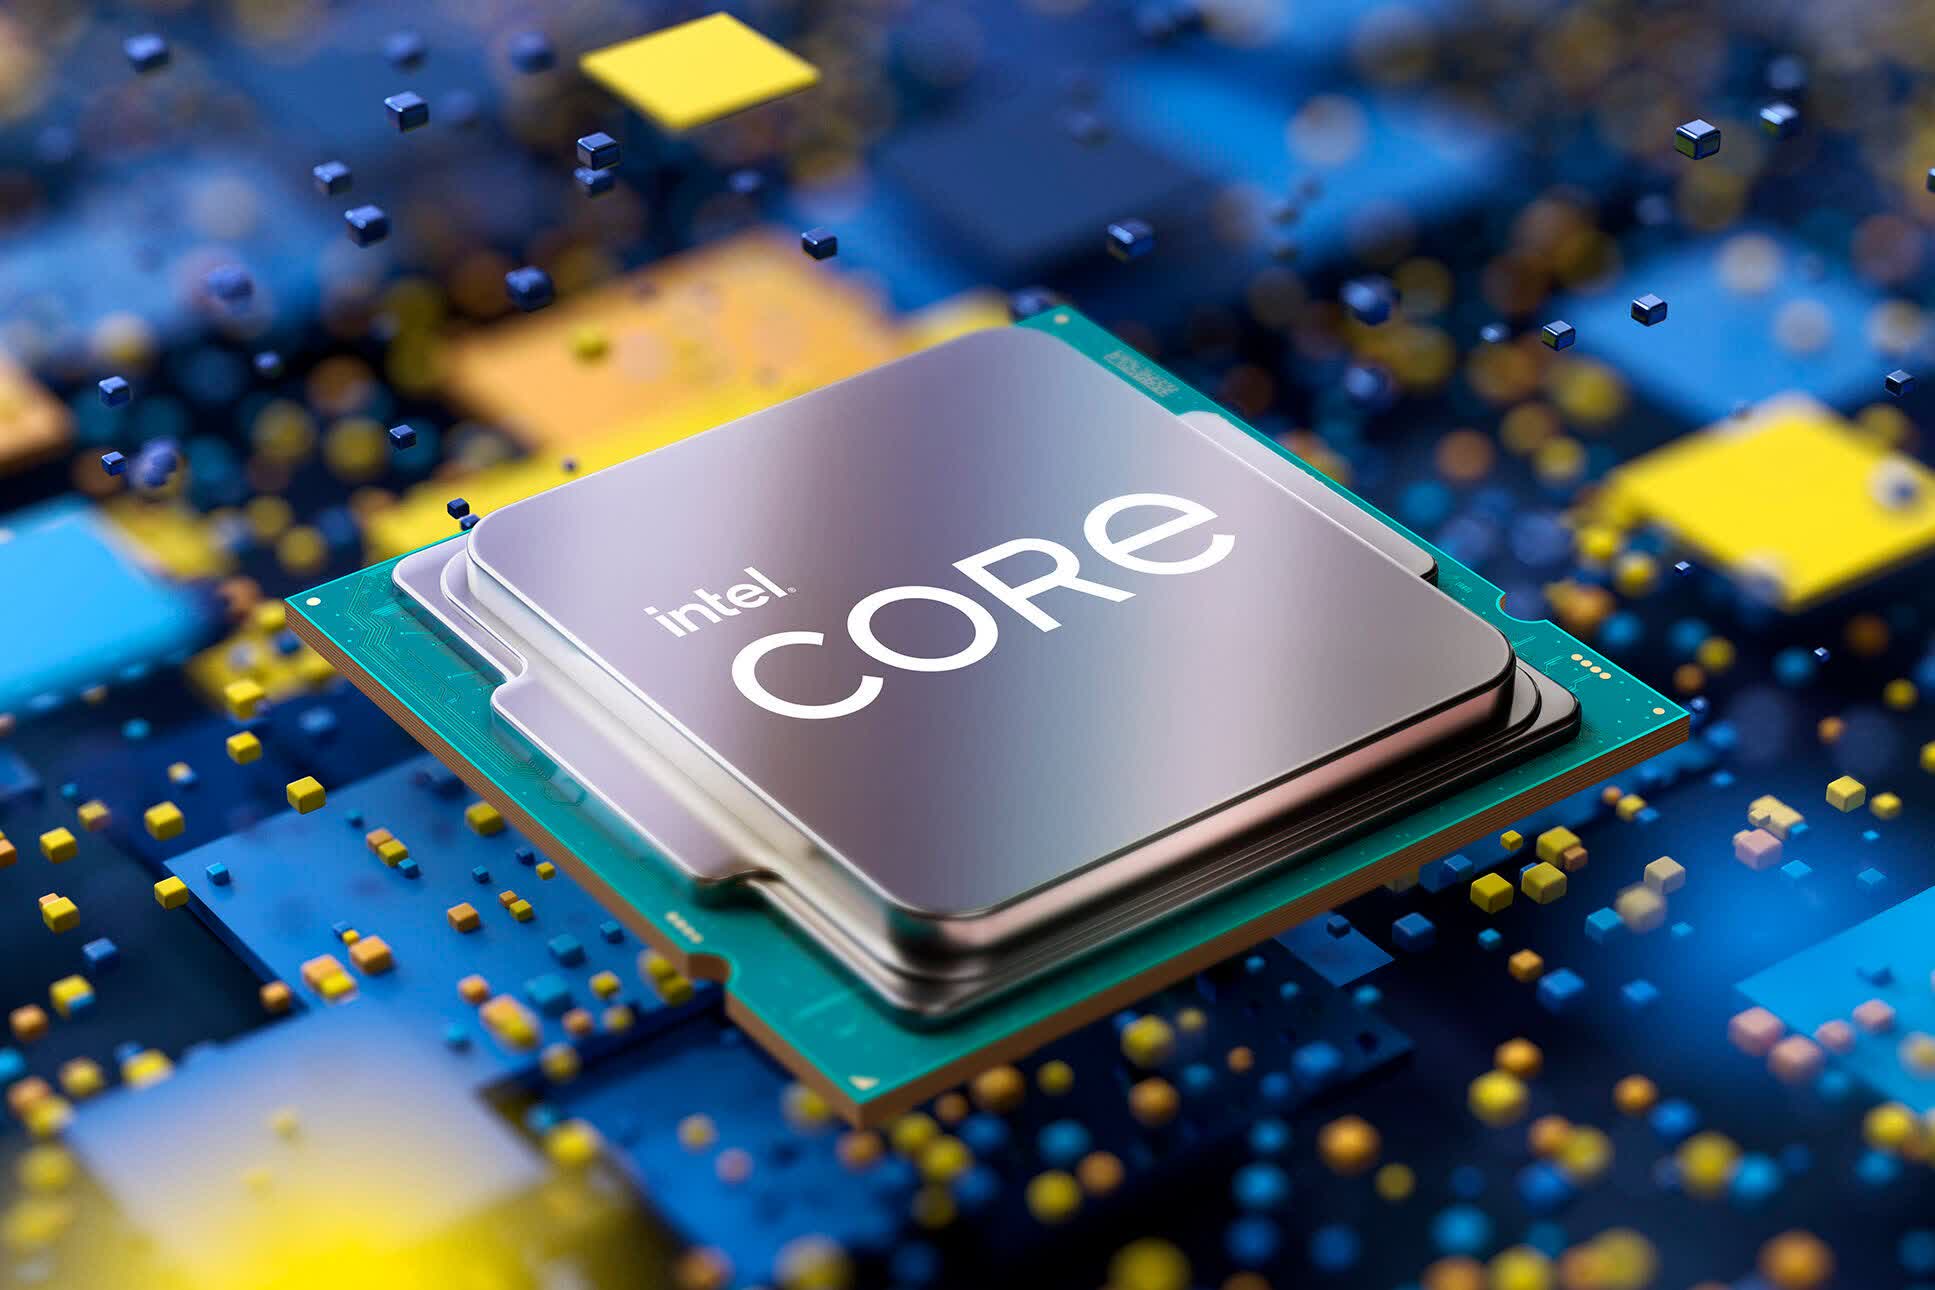 Retail Core i9-13900K CPU reviewed, provides impressive performance uplift with power limits disabled